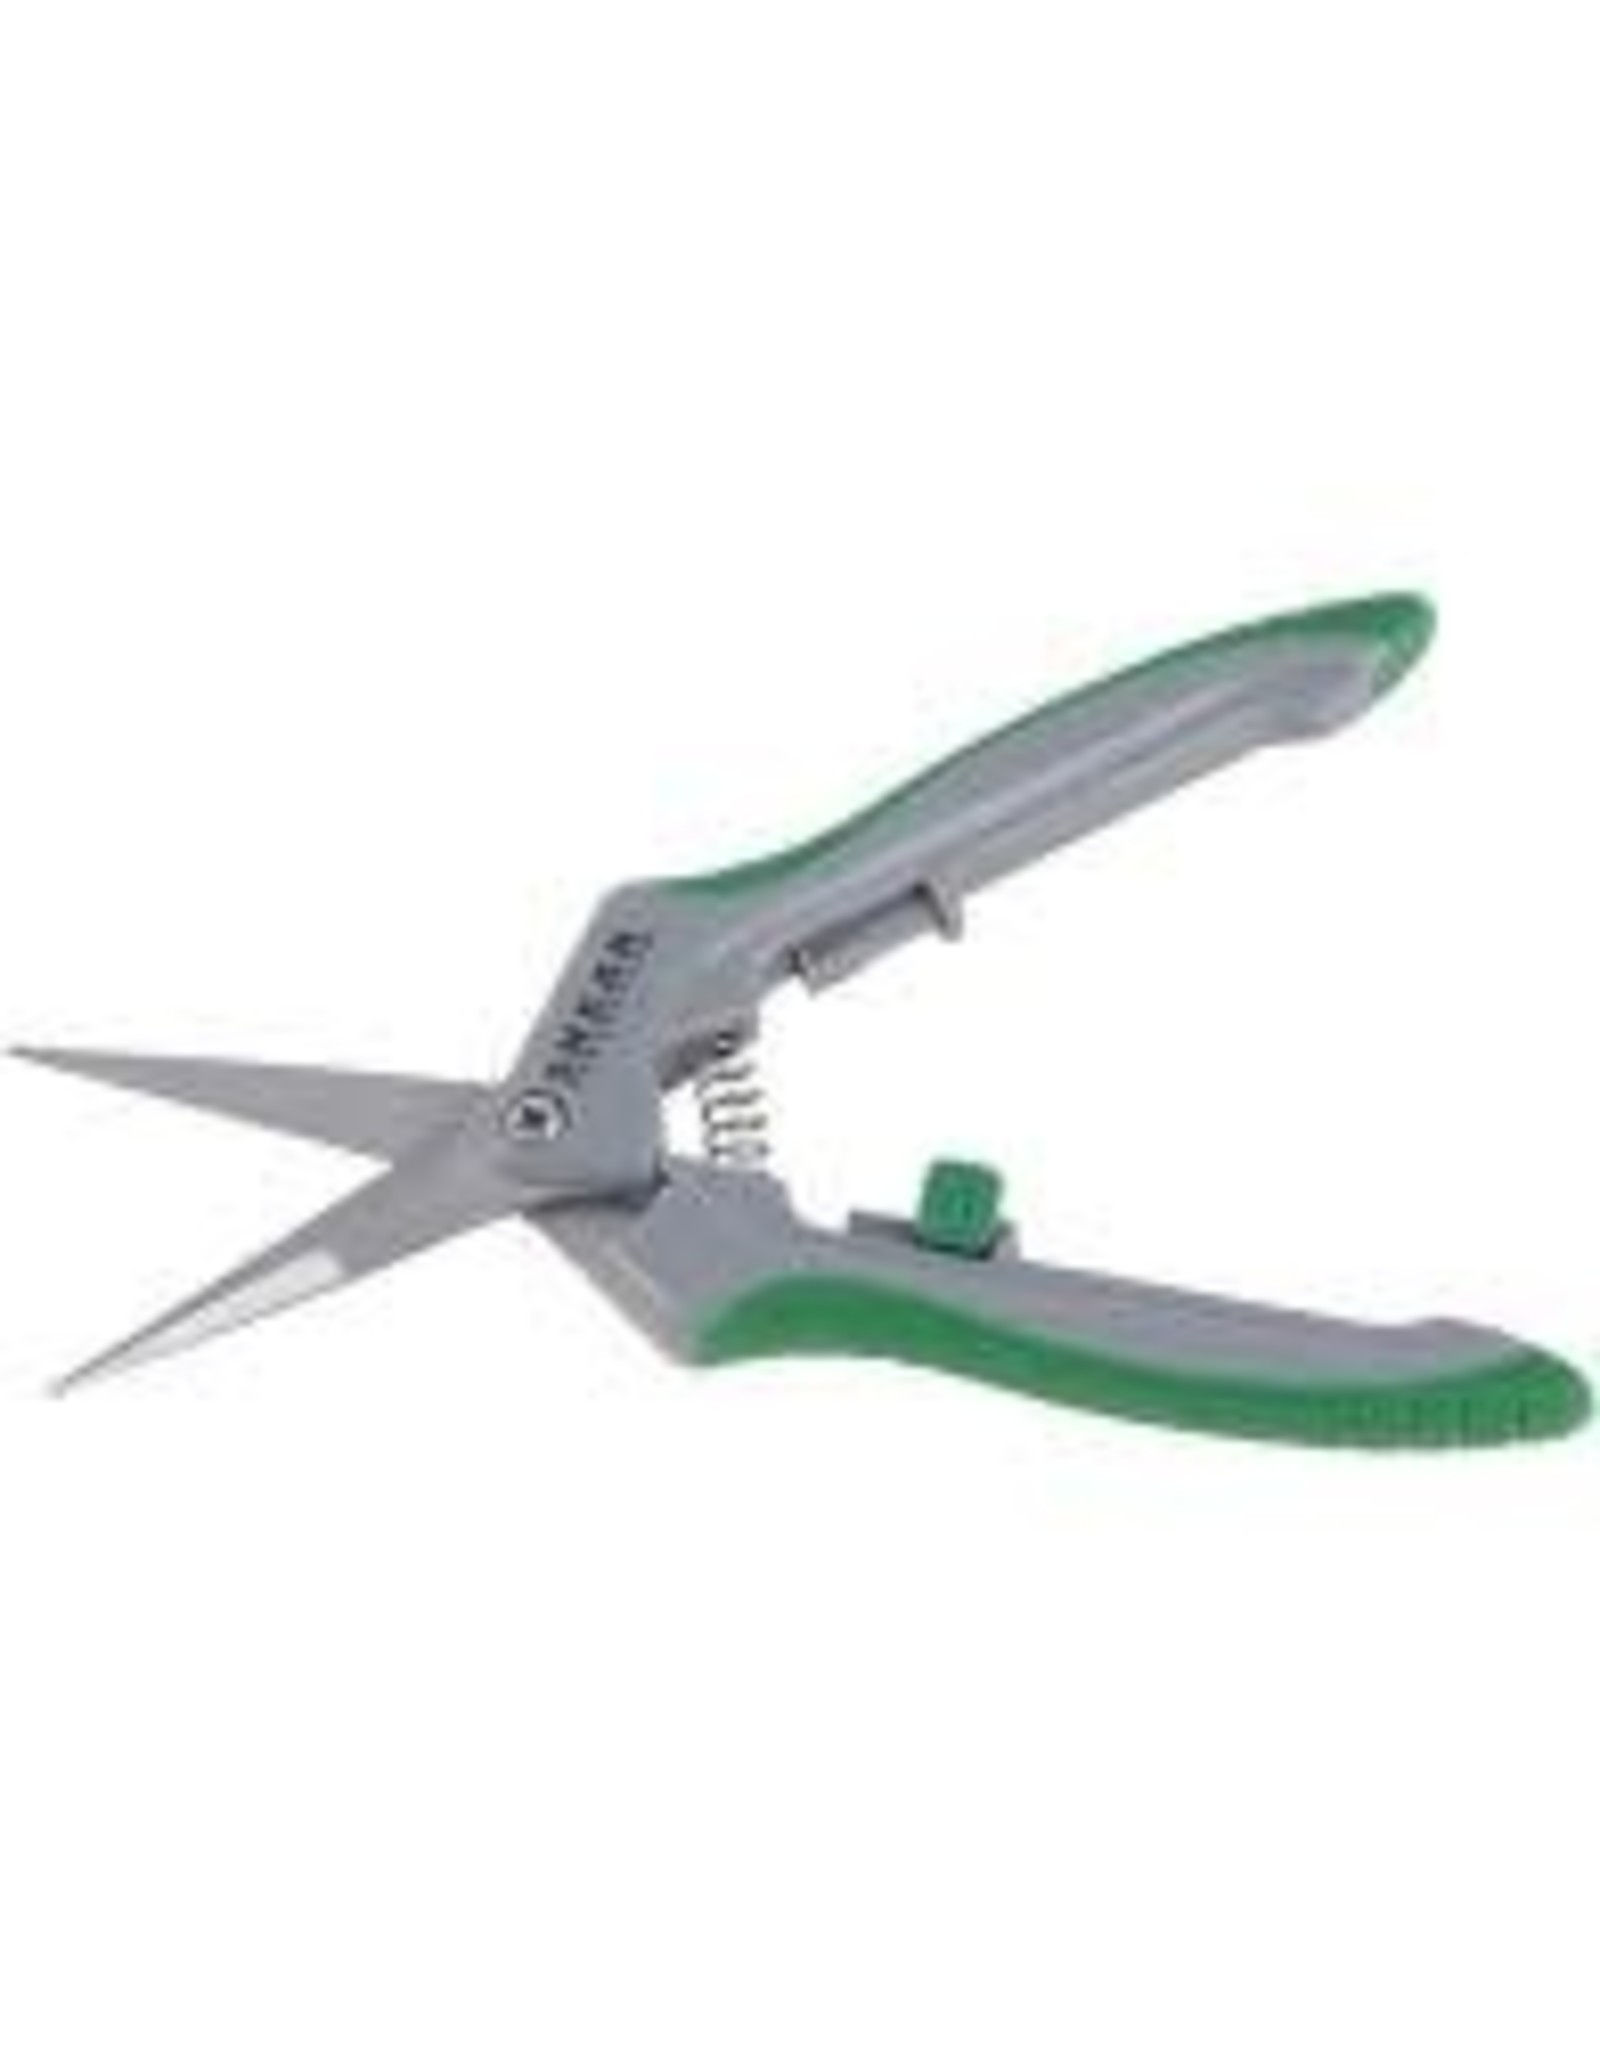 Shear Perfection Shear Perfection Platinum Stainless Trimming Shear - 2 in Straight Blades